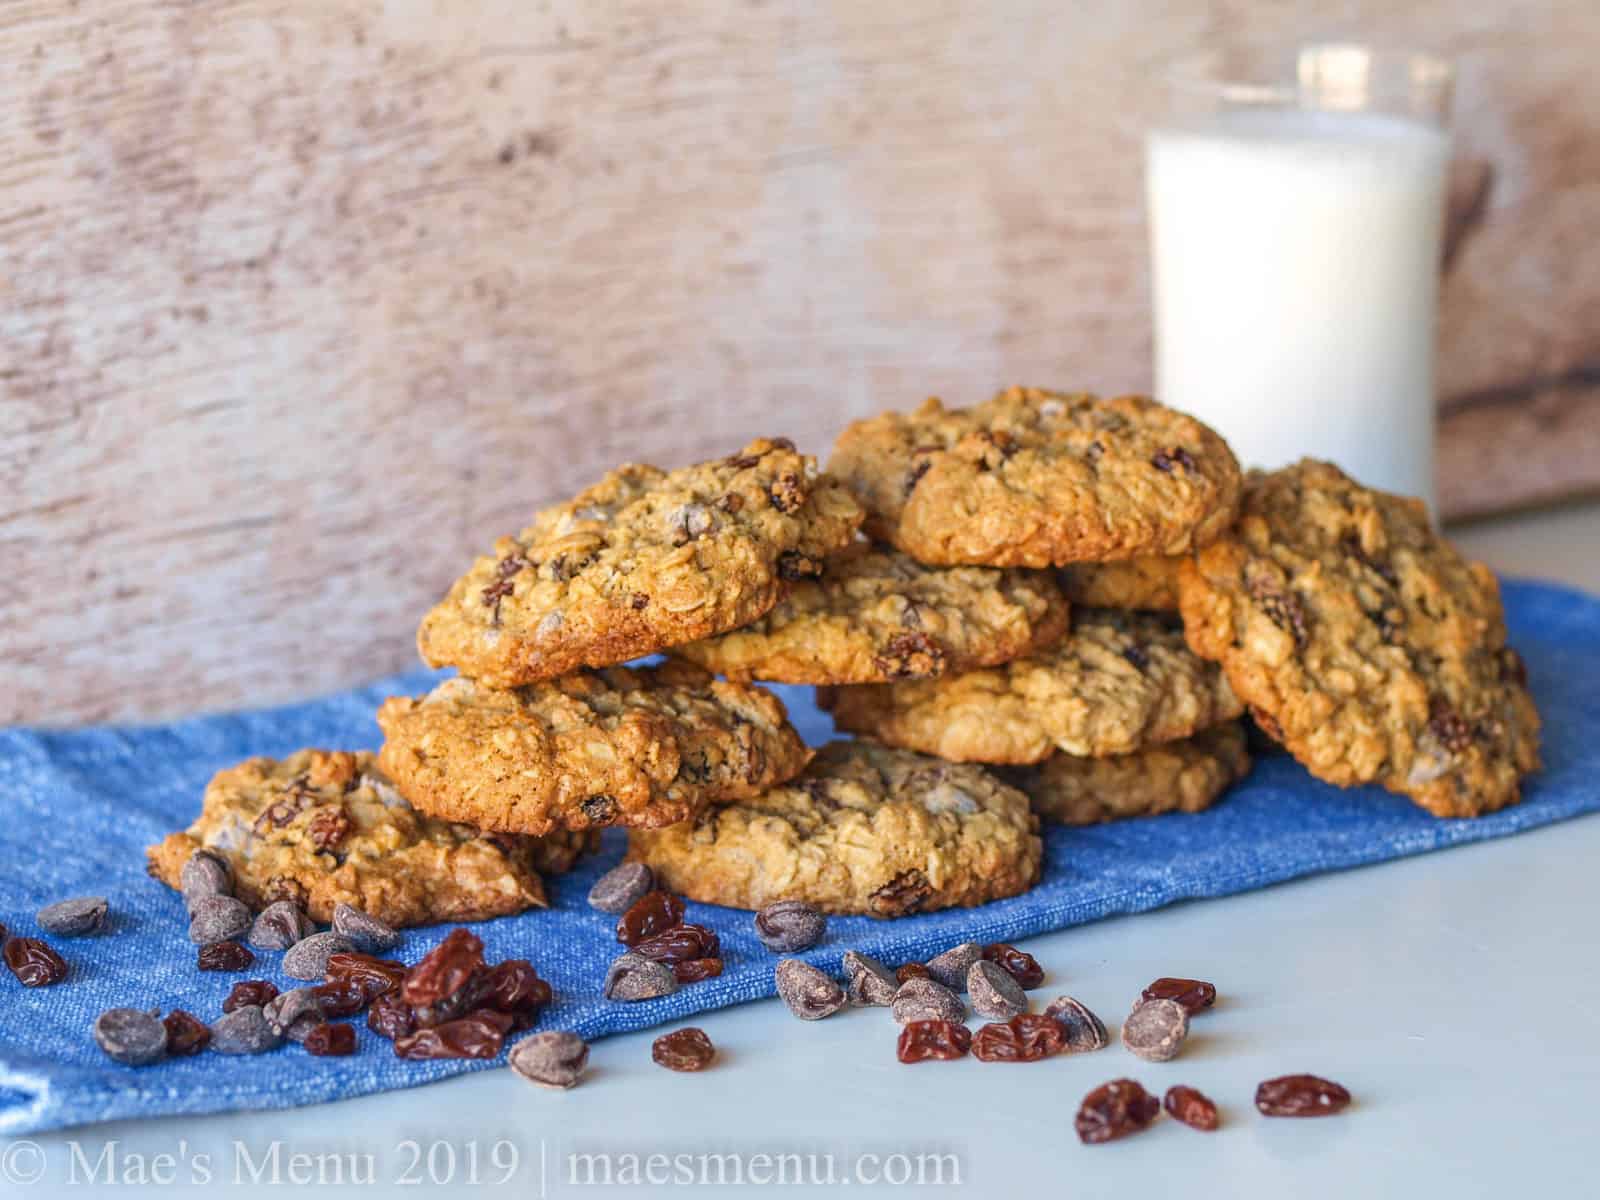 Stack of oatmeal raisin chocolate chip cookies next to a glass of milk.